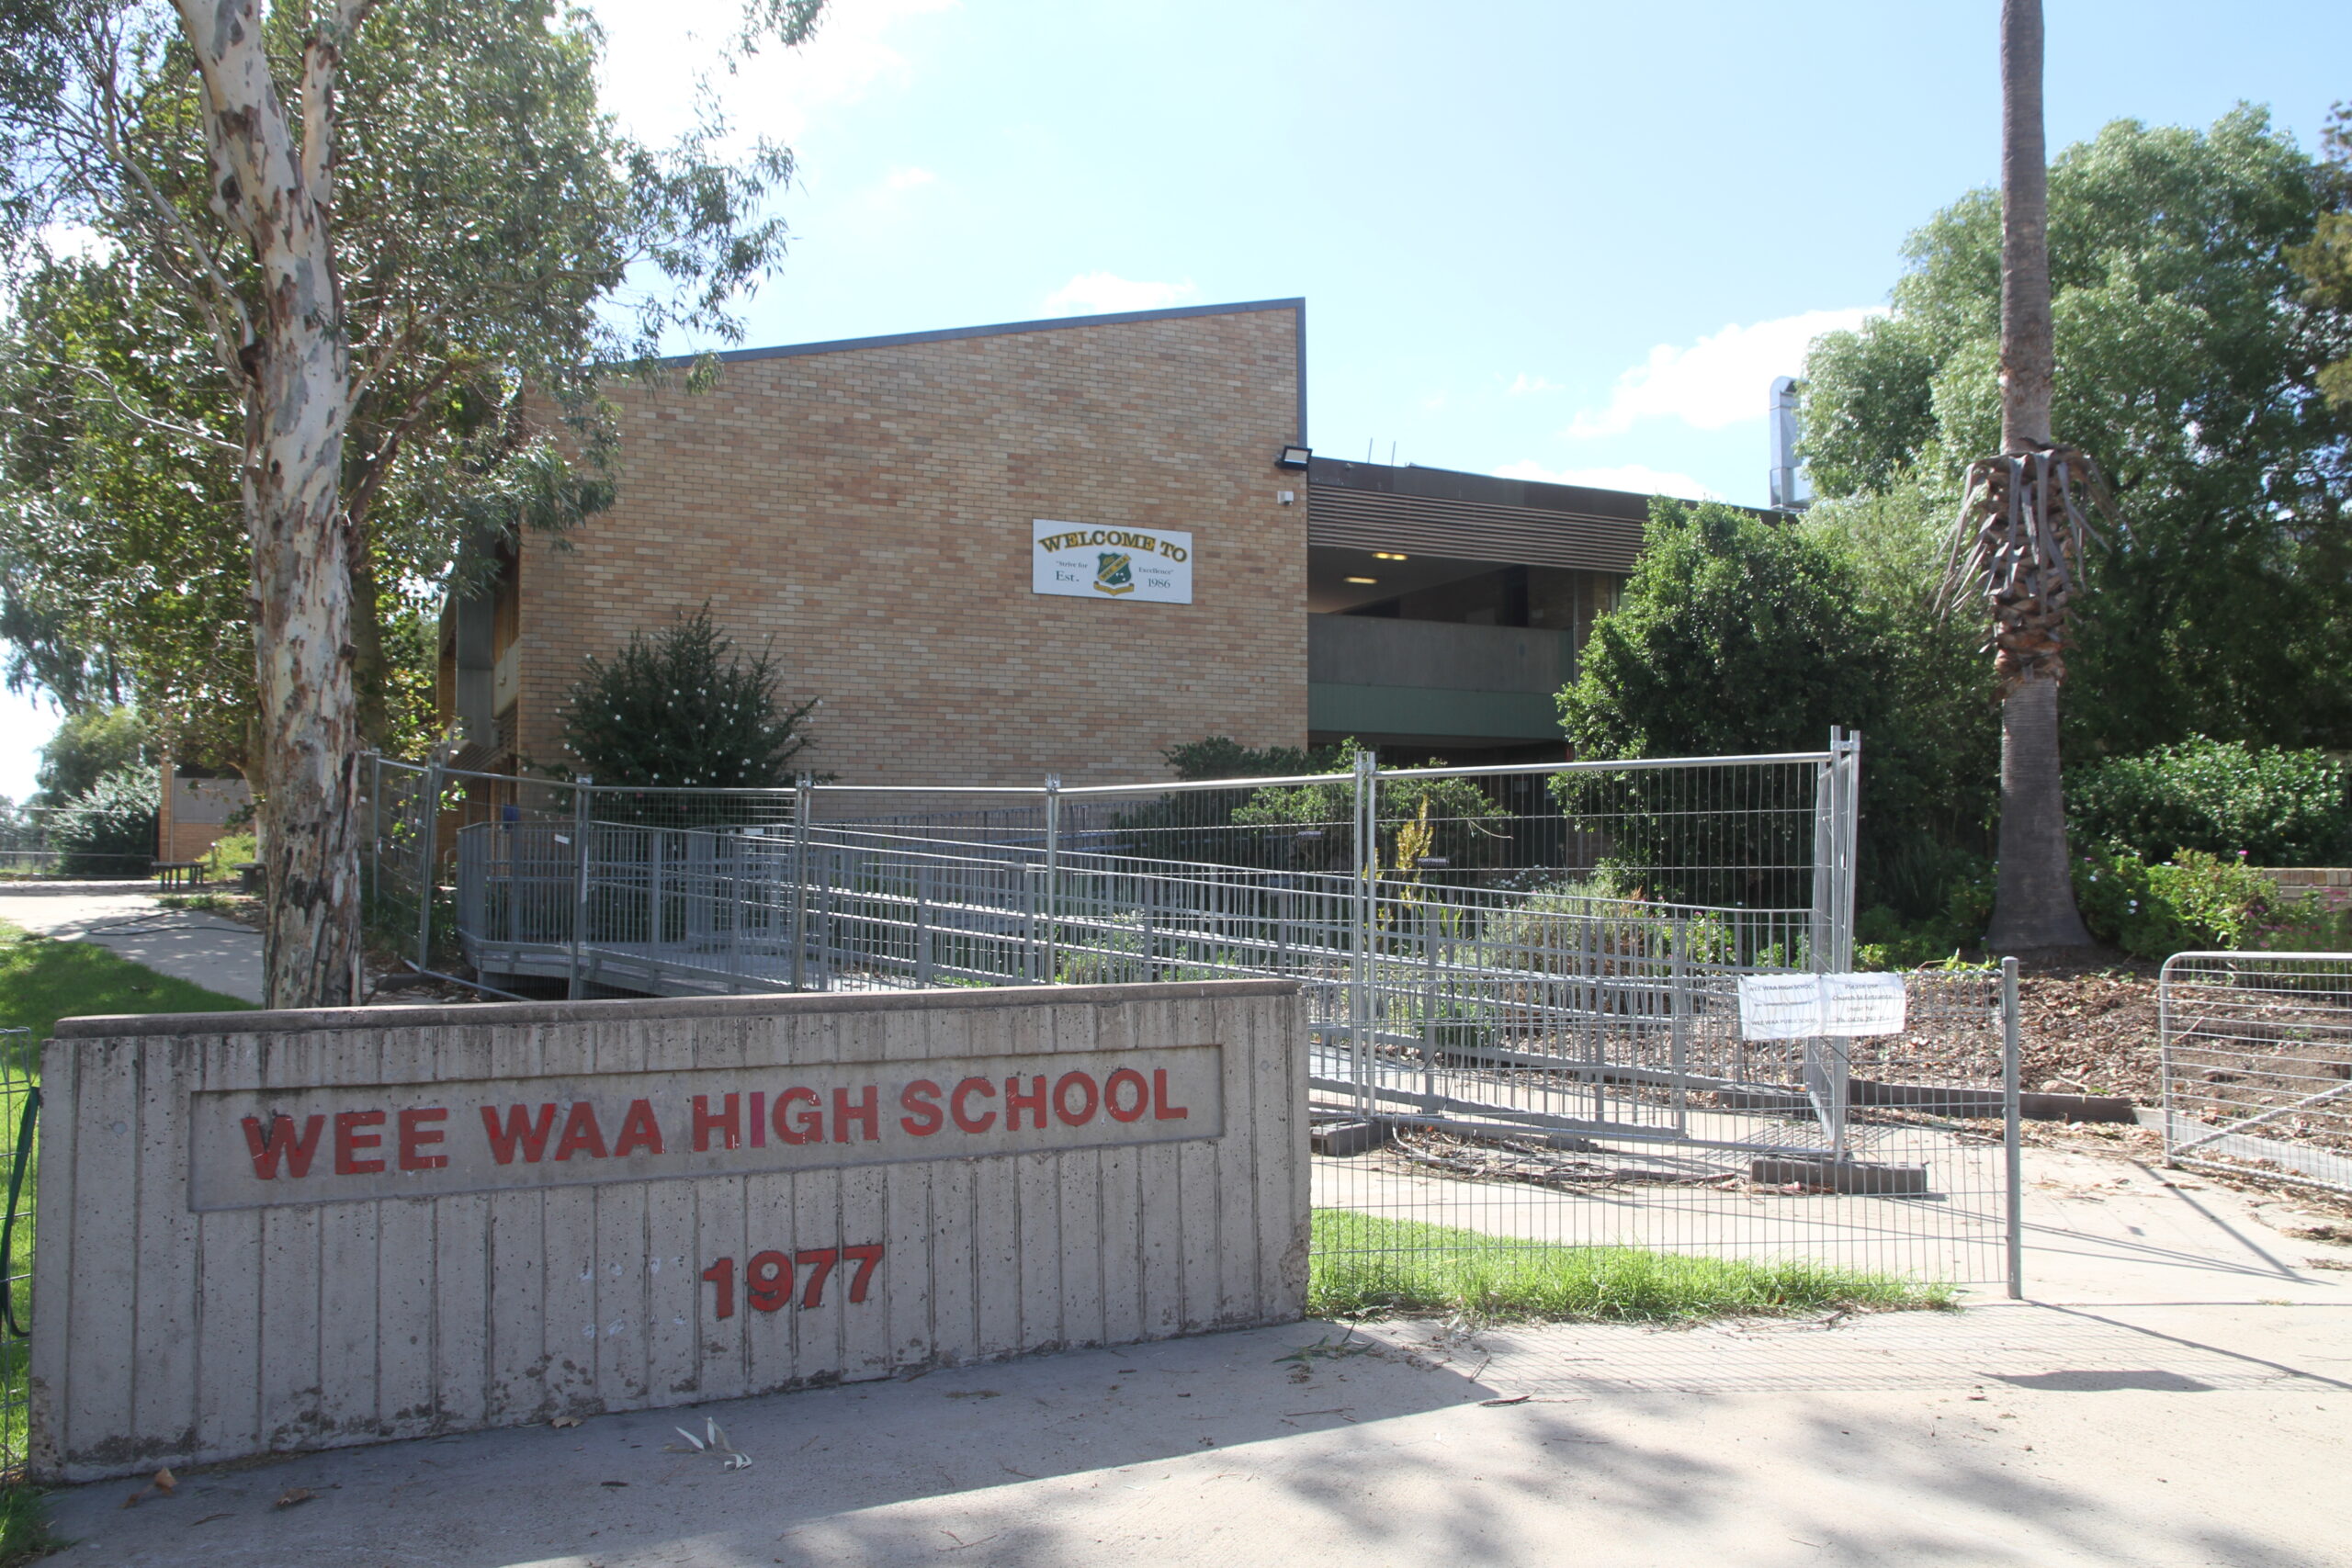 New high school at Wee Waa firming up as the likely option